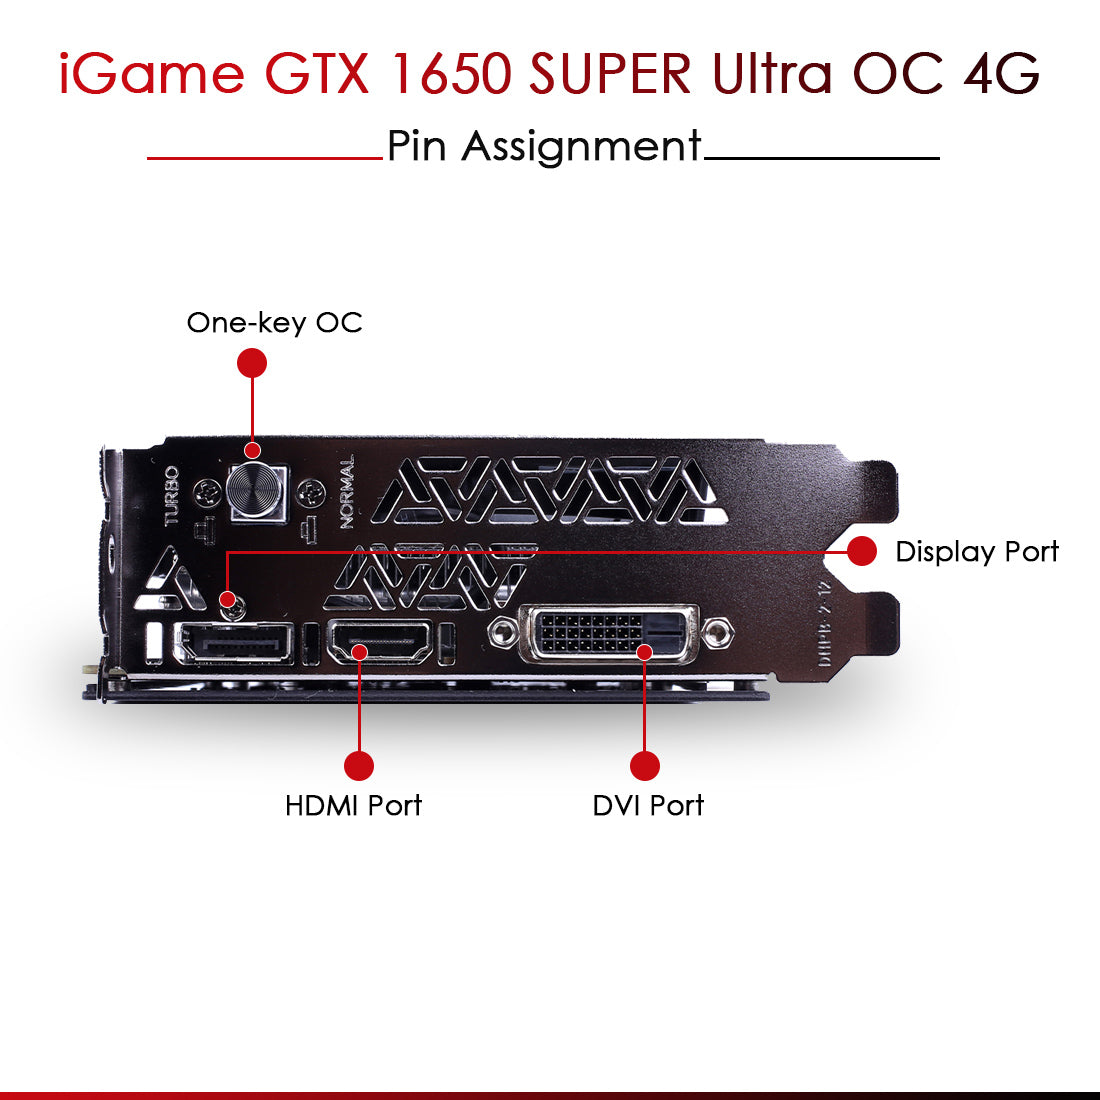 Colorful iGame GeForce GTX 1650 Super Ultra OC 4G-V 4GB DDR6 Gaming Graphics Card